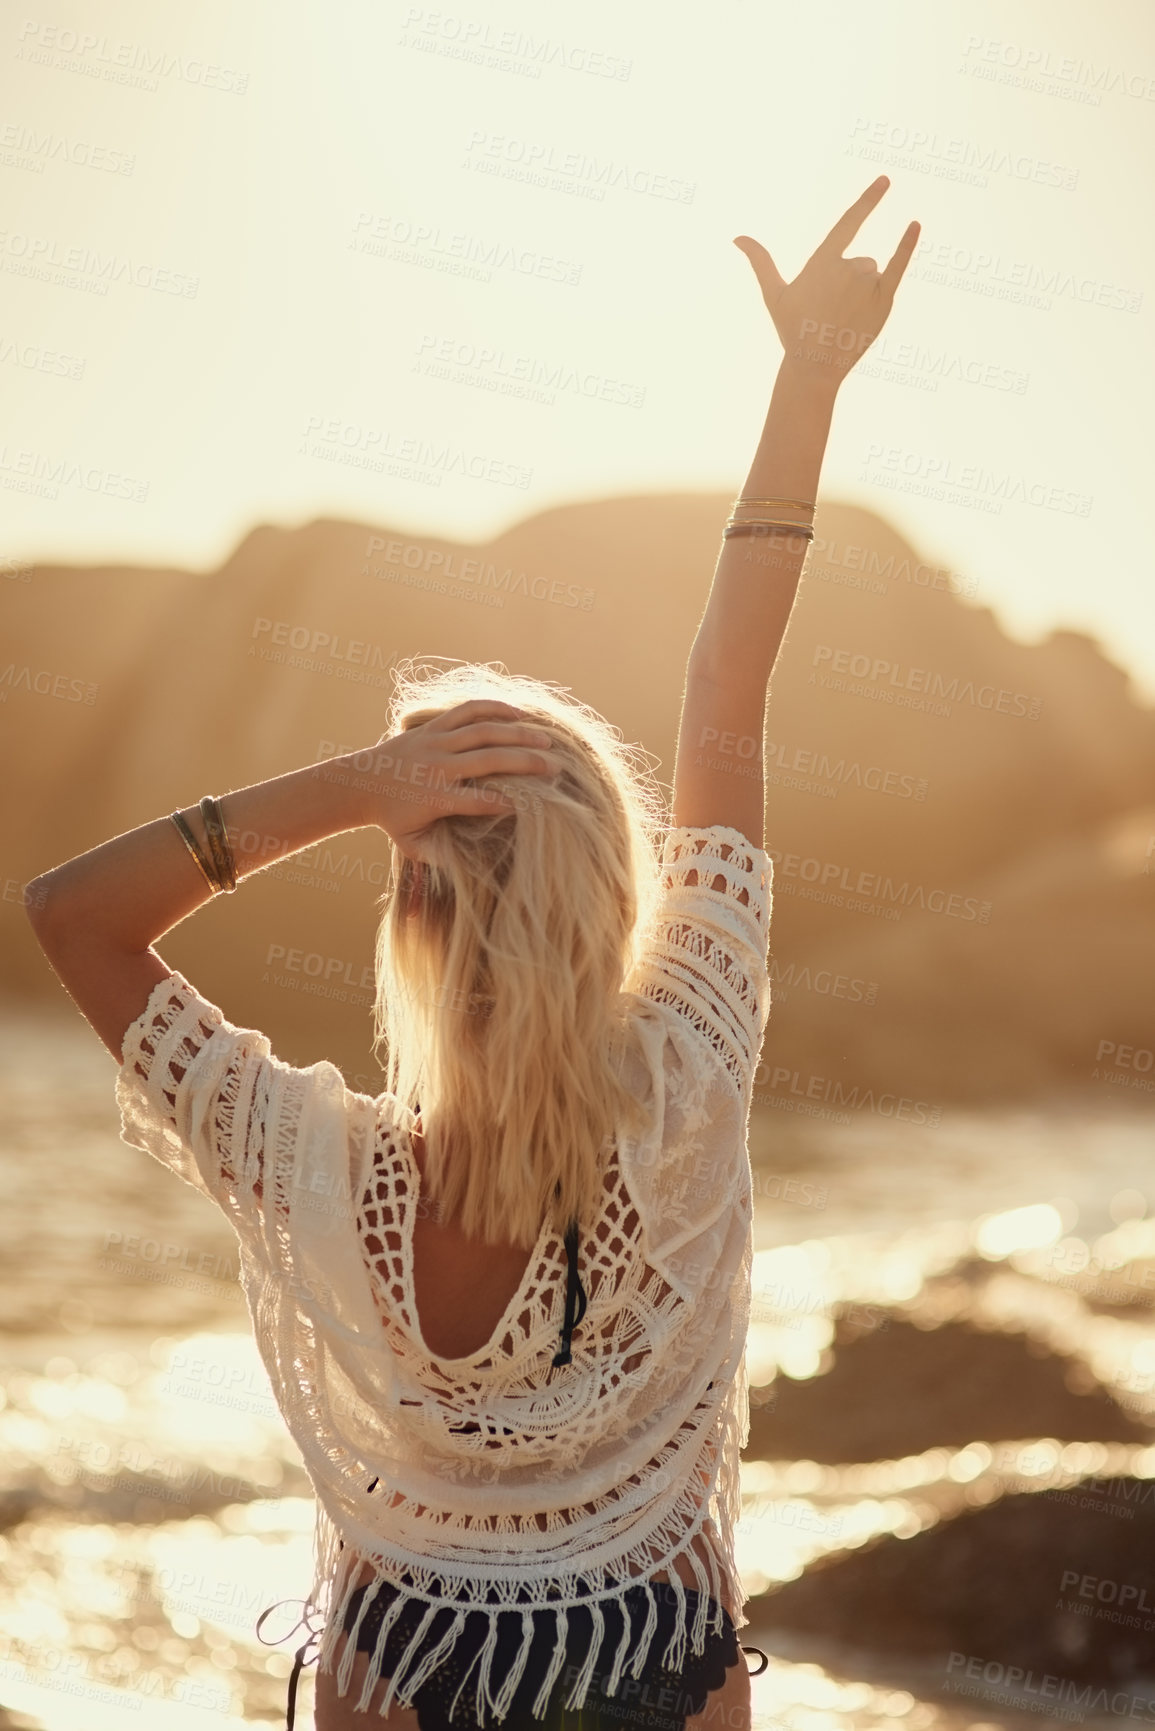 Buy stock photo Rearview shot of a young woman on the beach with her hand in the air